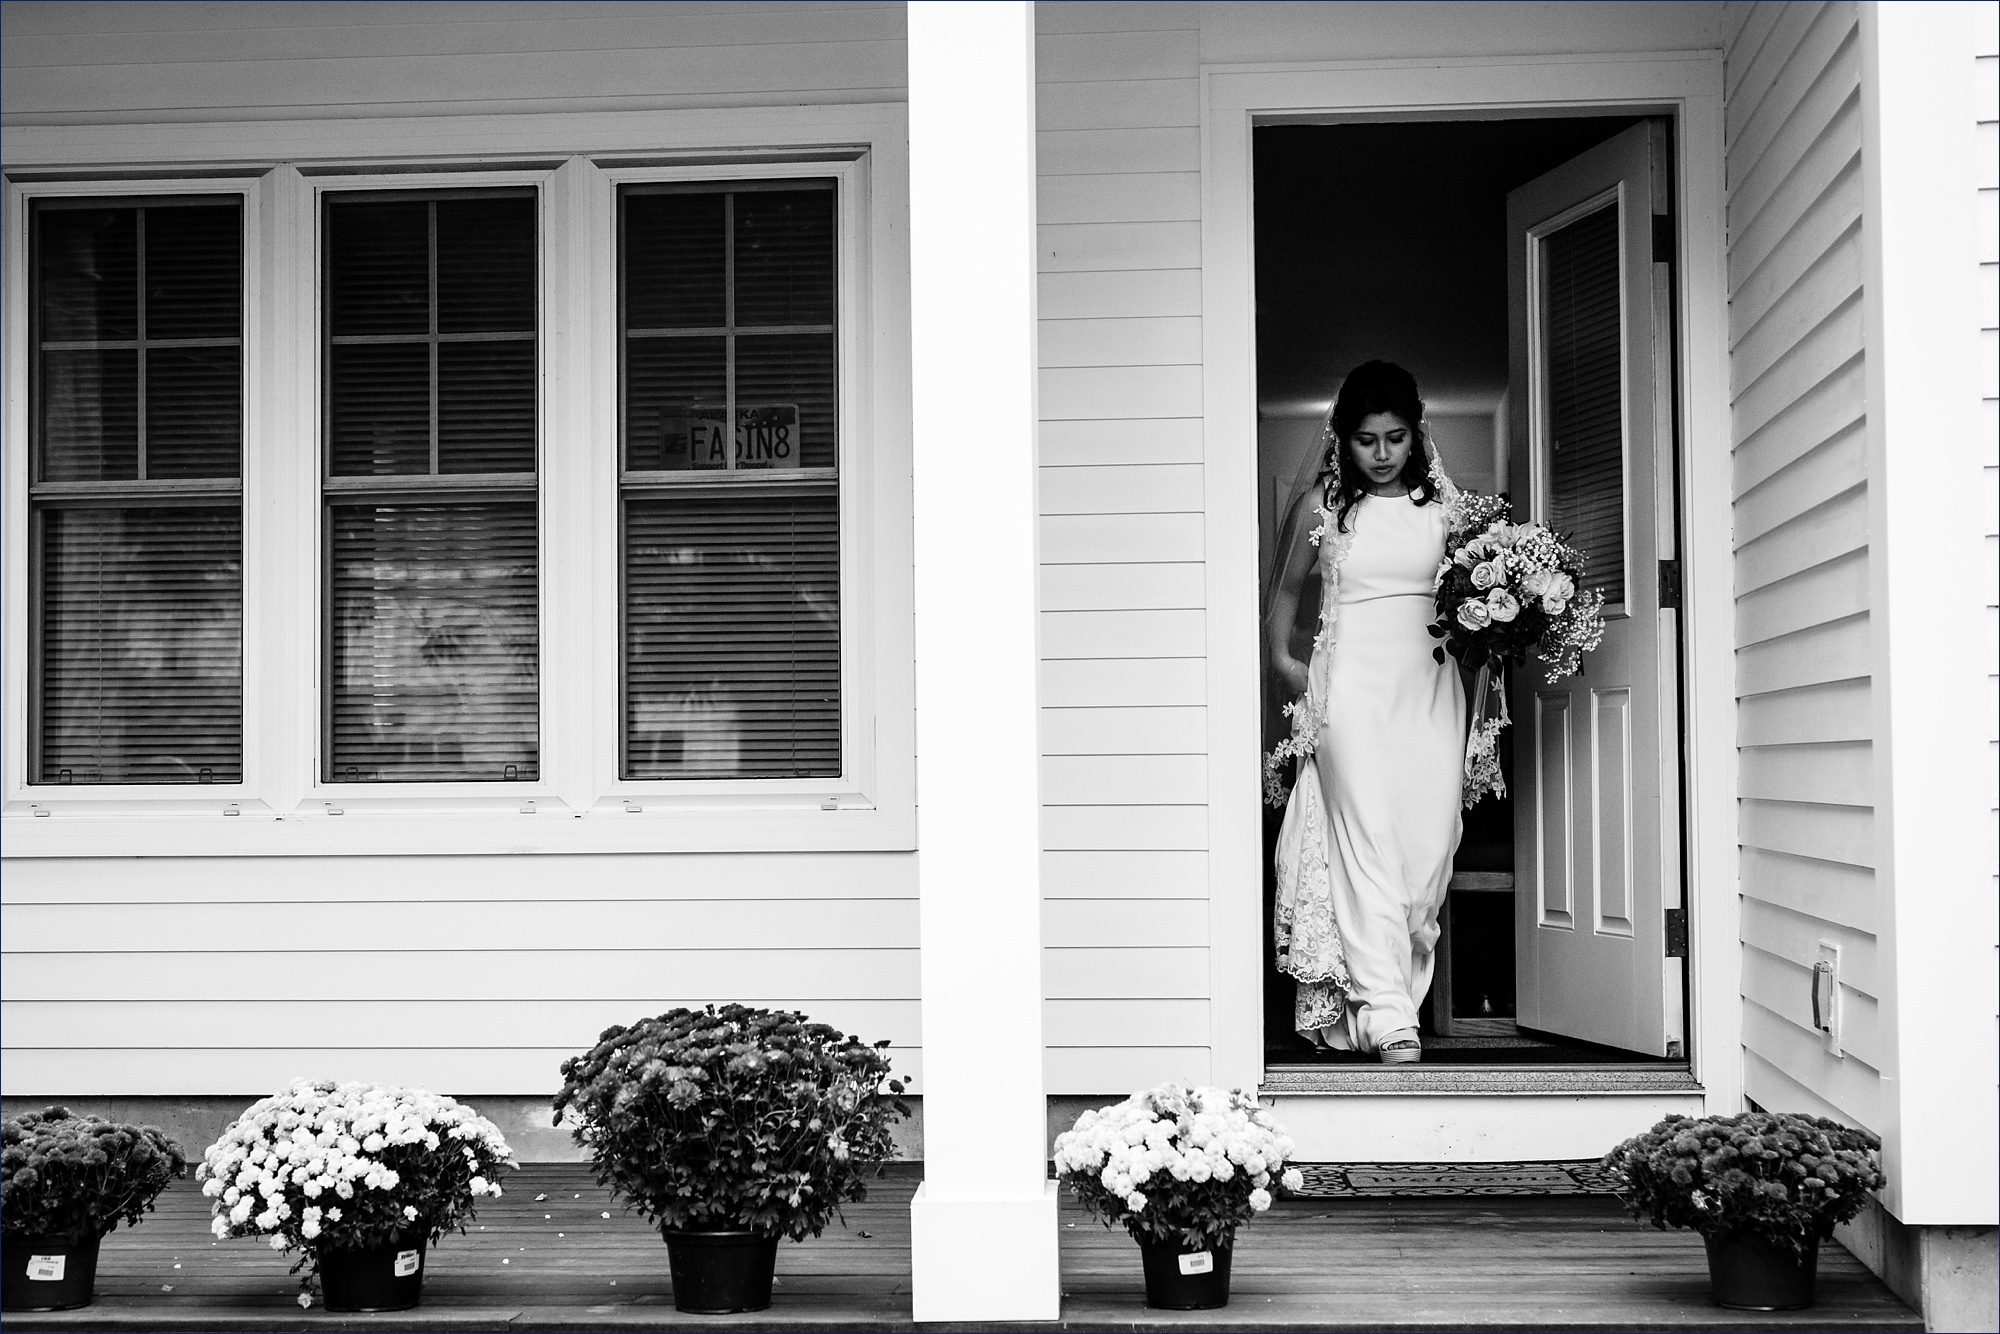 The bride leaves for the wedding ceremony from her home